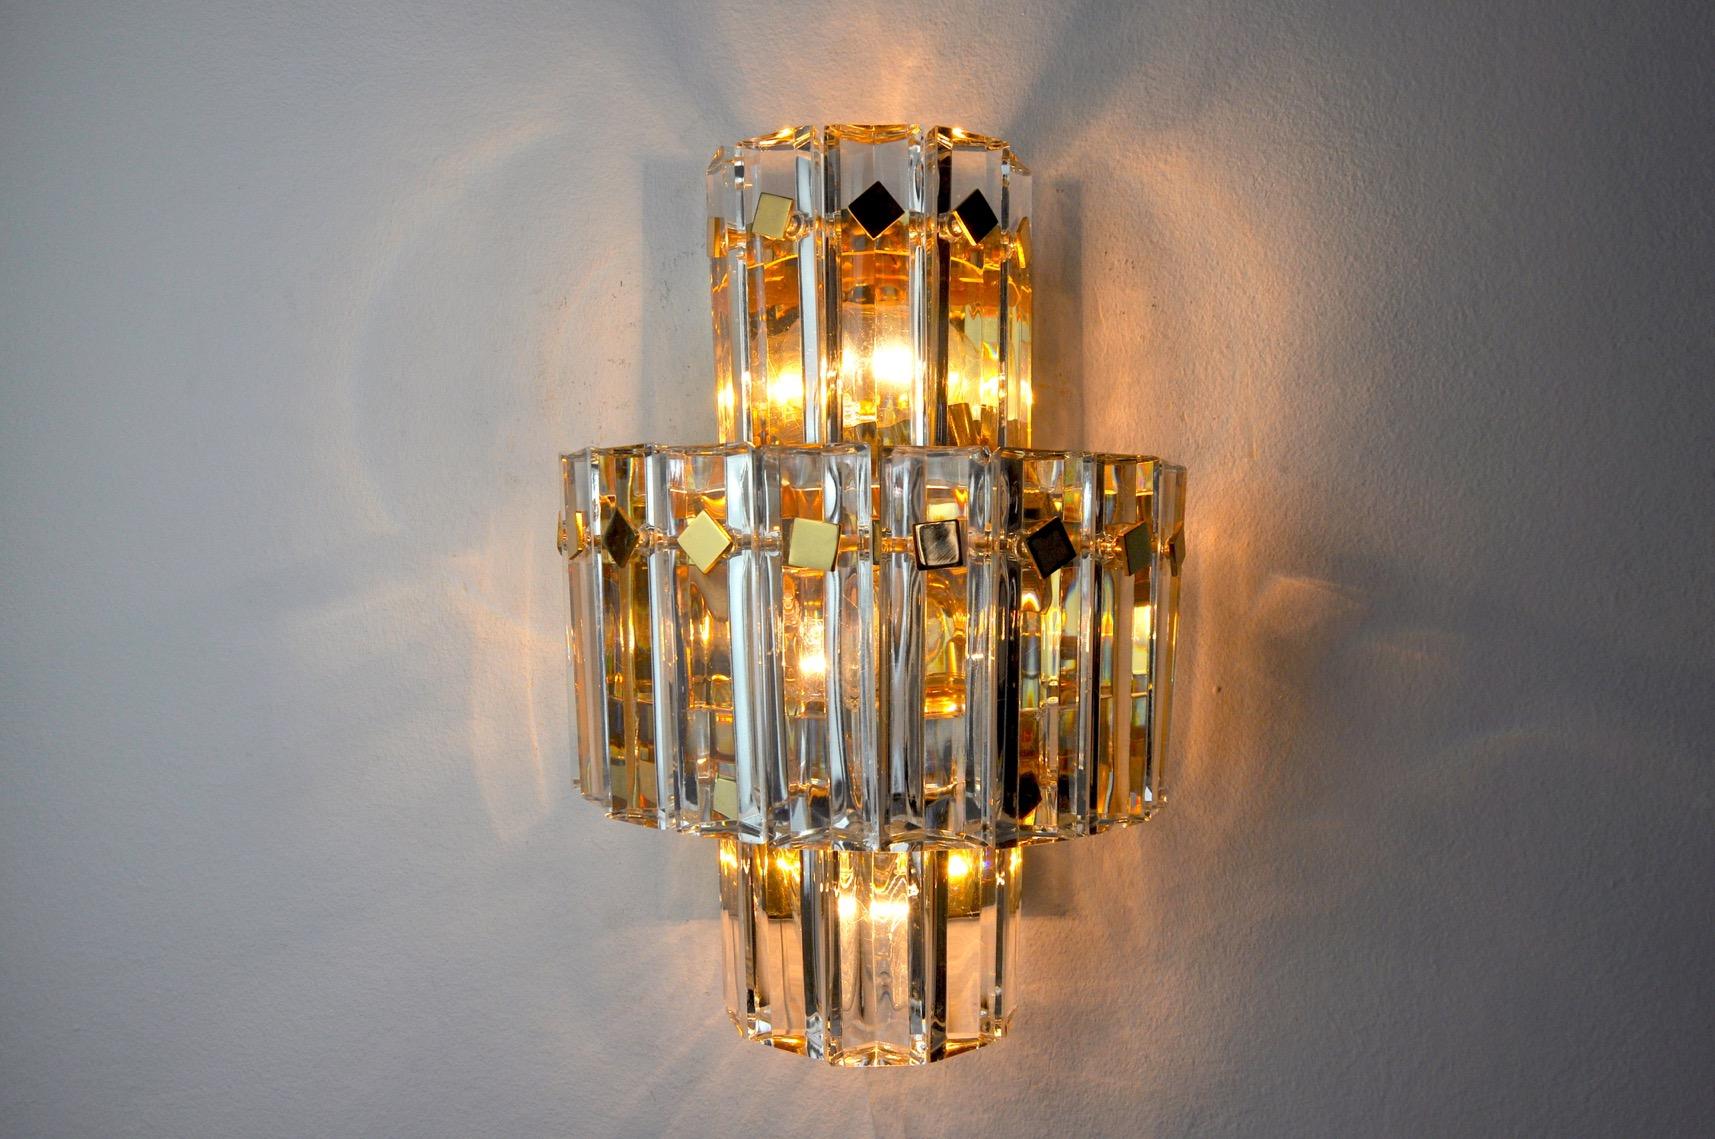 Superb and atypical kinkeldey wall lamp designated and produced in Germany in the 1970s. Crystals spread over 3 levels, cut and distributed on a golden metal structure. Very beautiful design object that will illuminate your interior wonderfully.